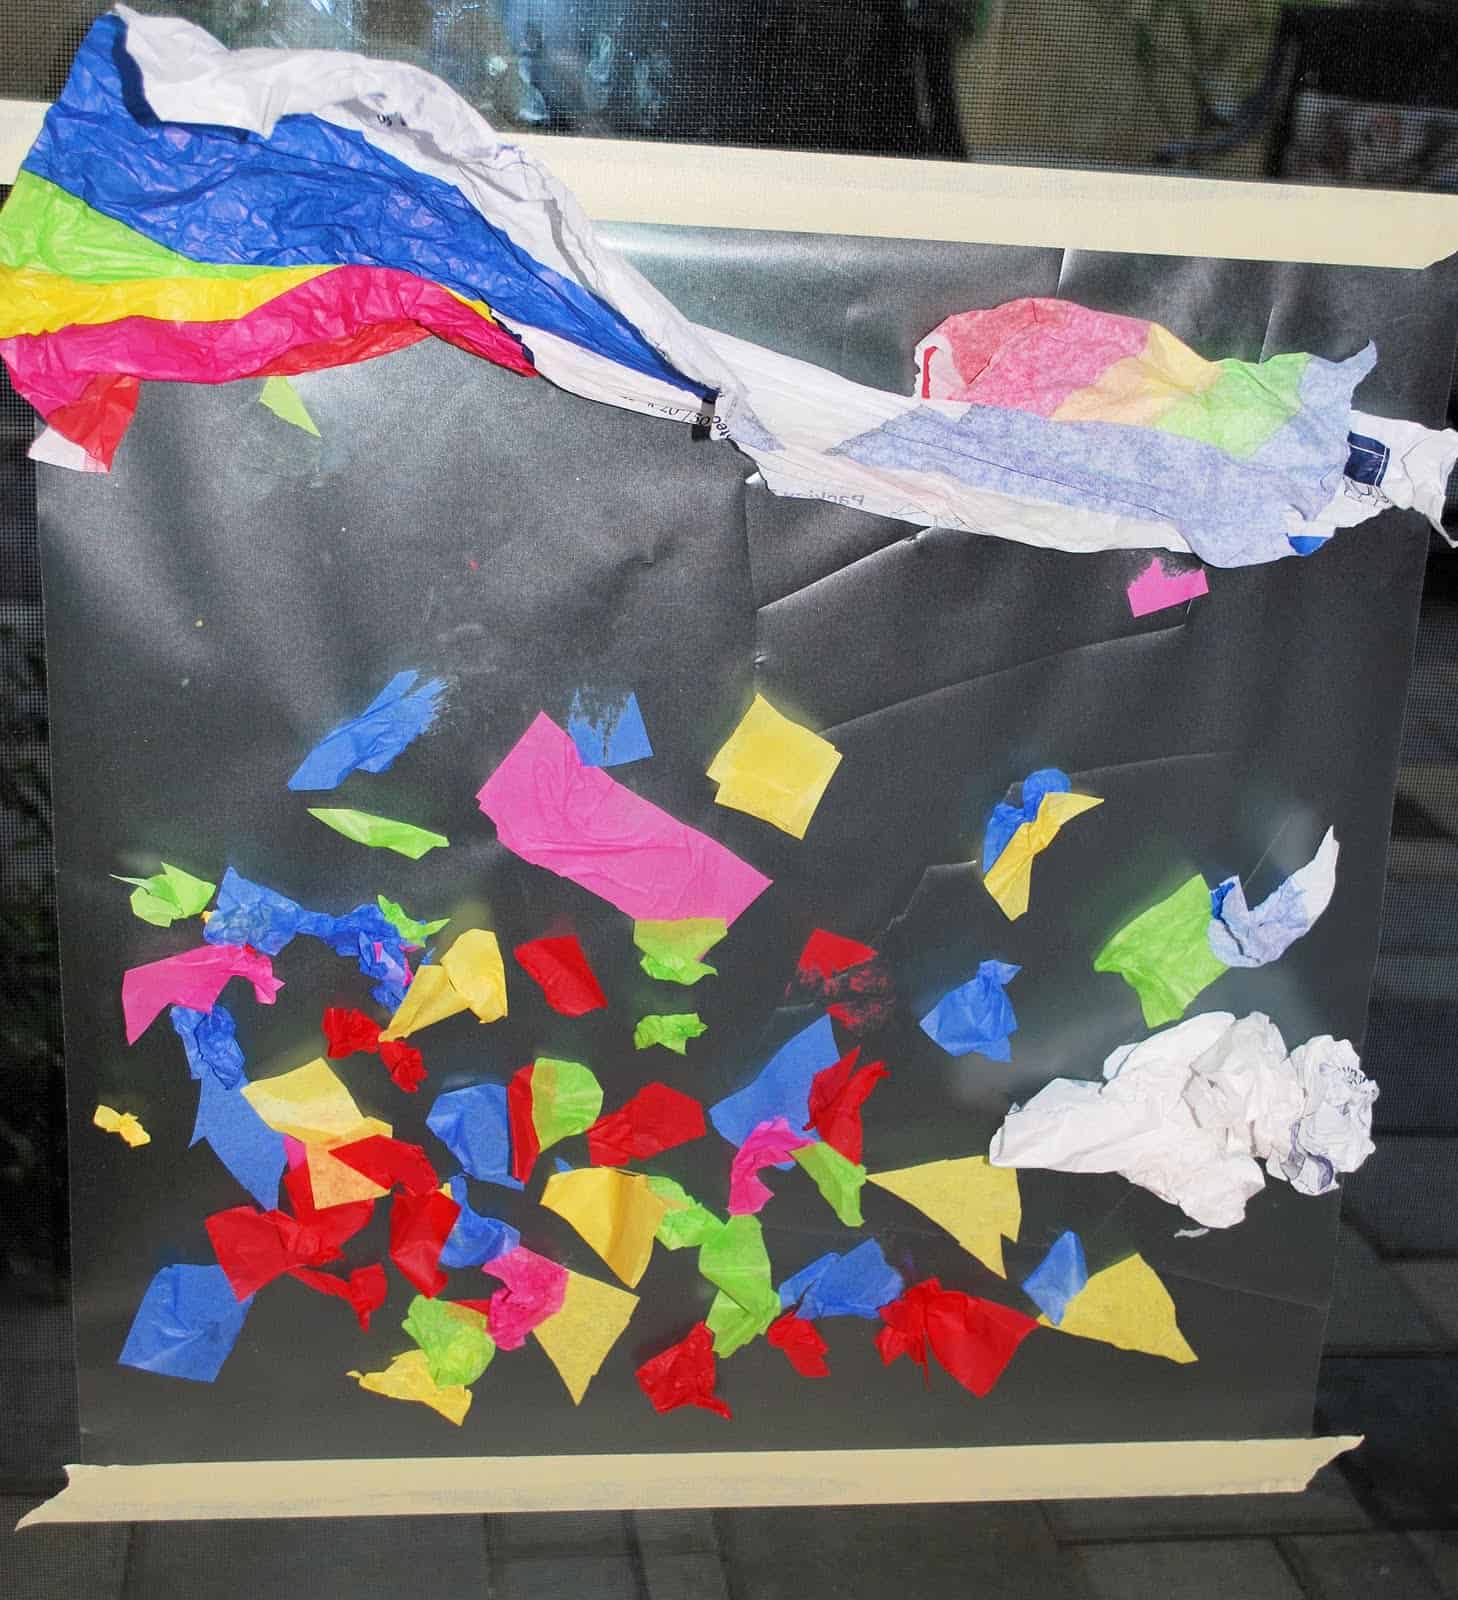 Contact Paper Art - Tissue Paper Sticky Window - Mess for Less